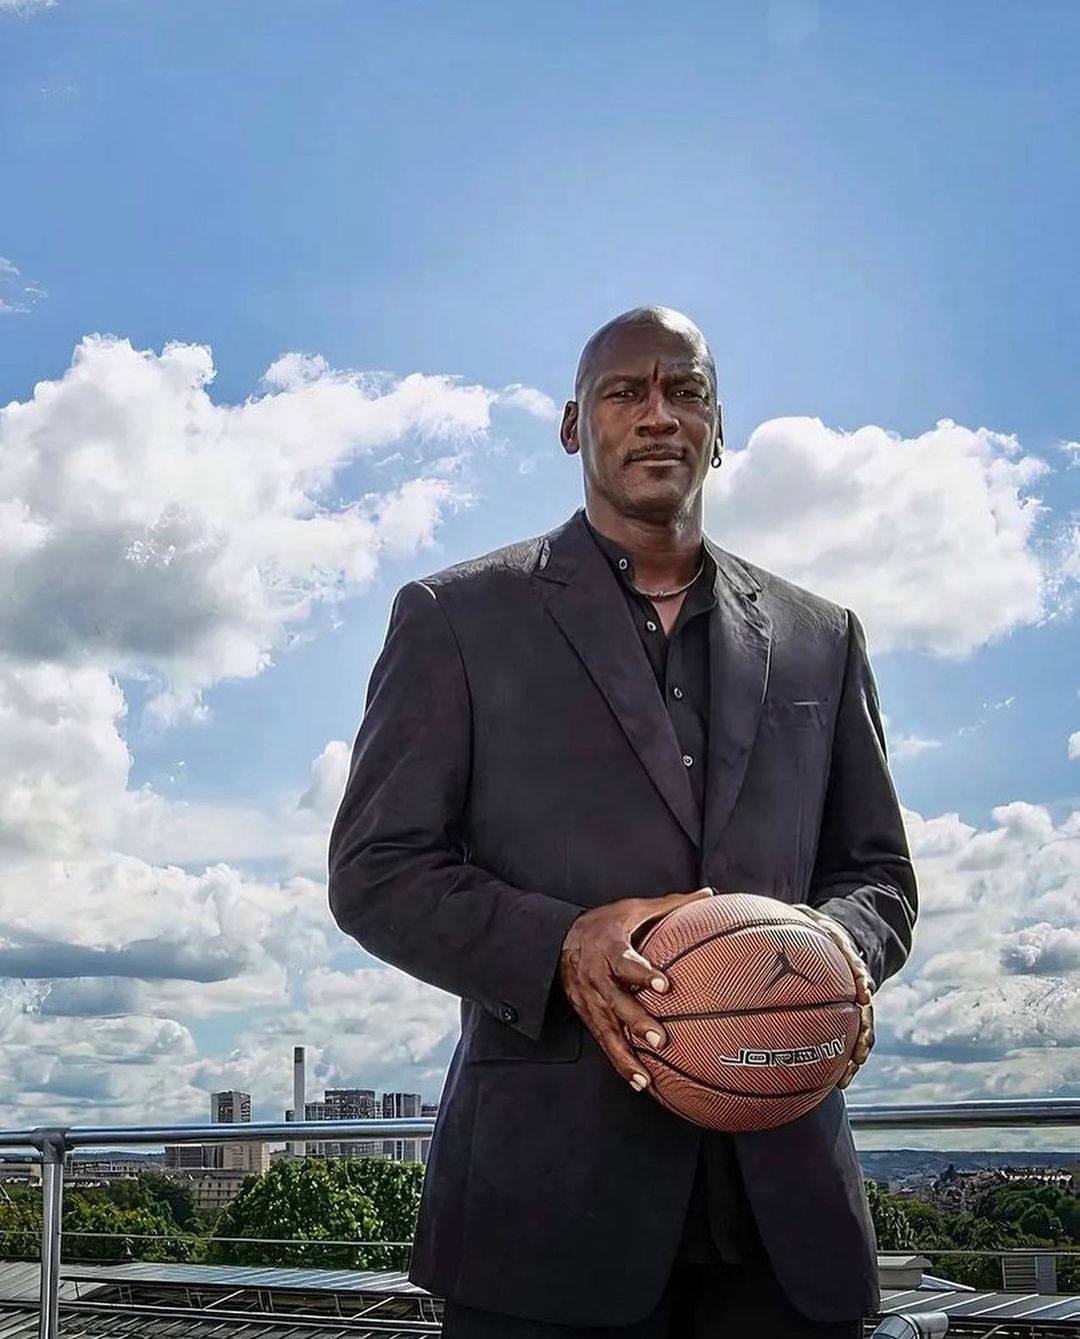 A look back at when Michael Jordan as his worth to the Chicago Bulls